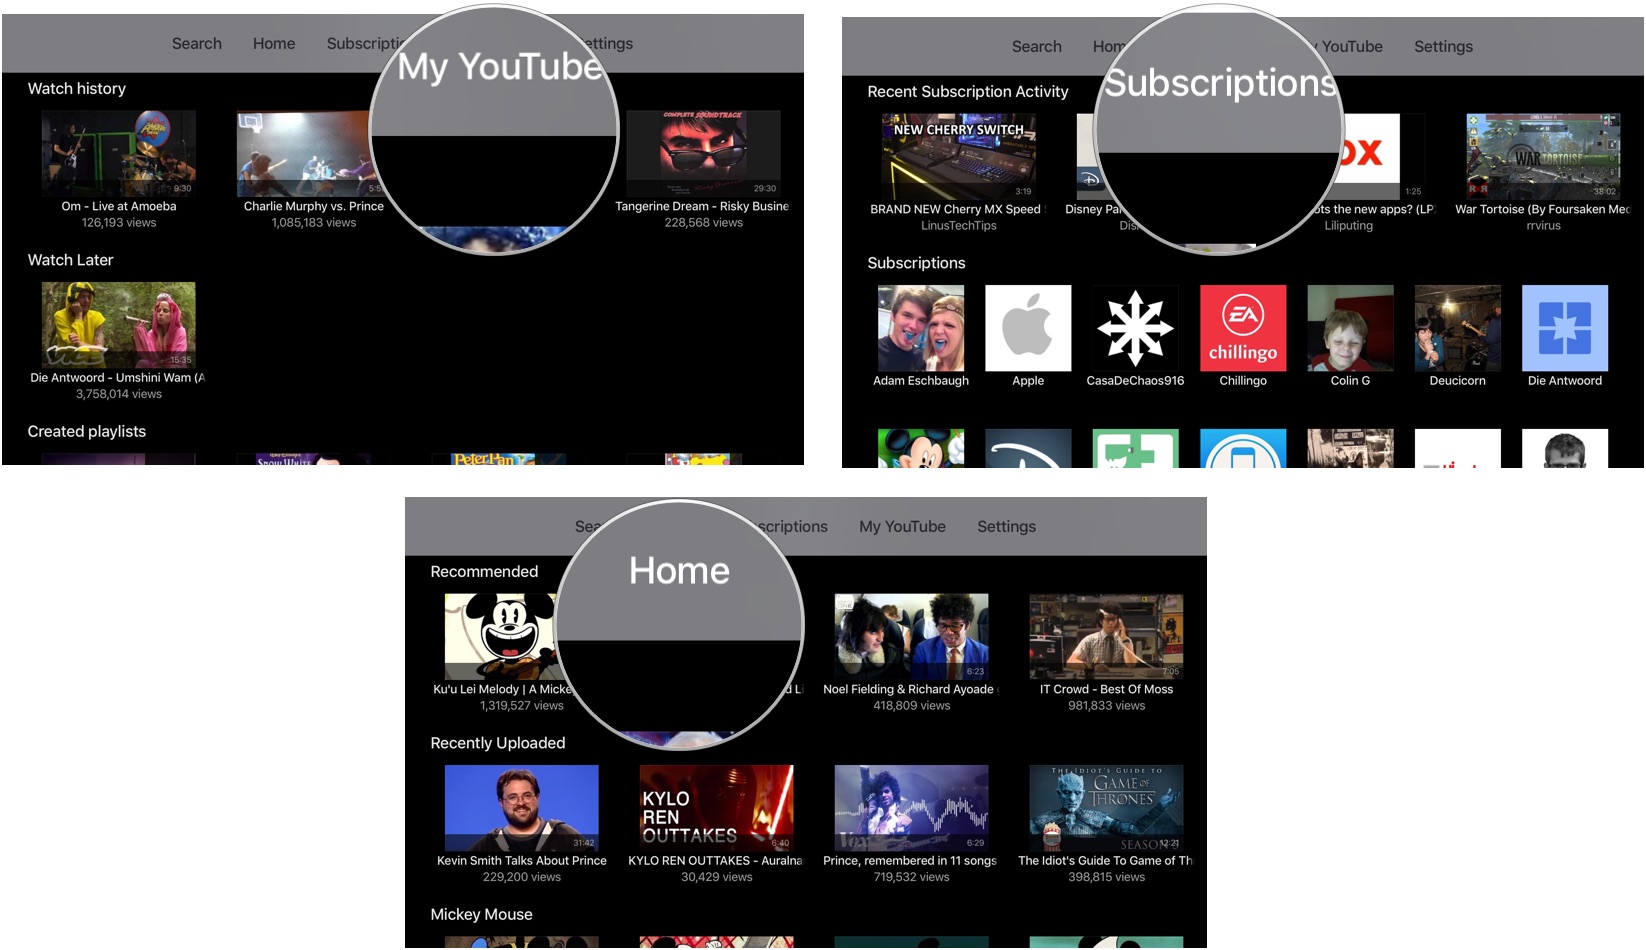 My YouTube, Subscriptions, and Home in YouTube on Apple TV